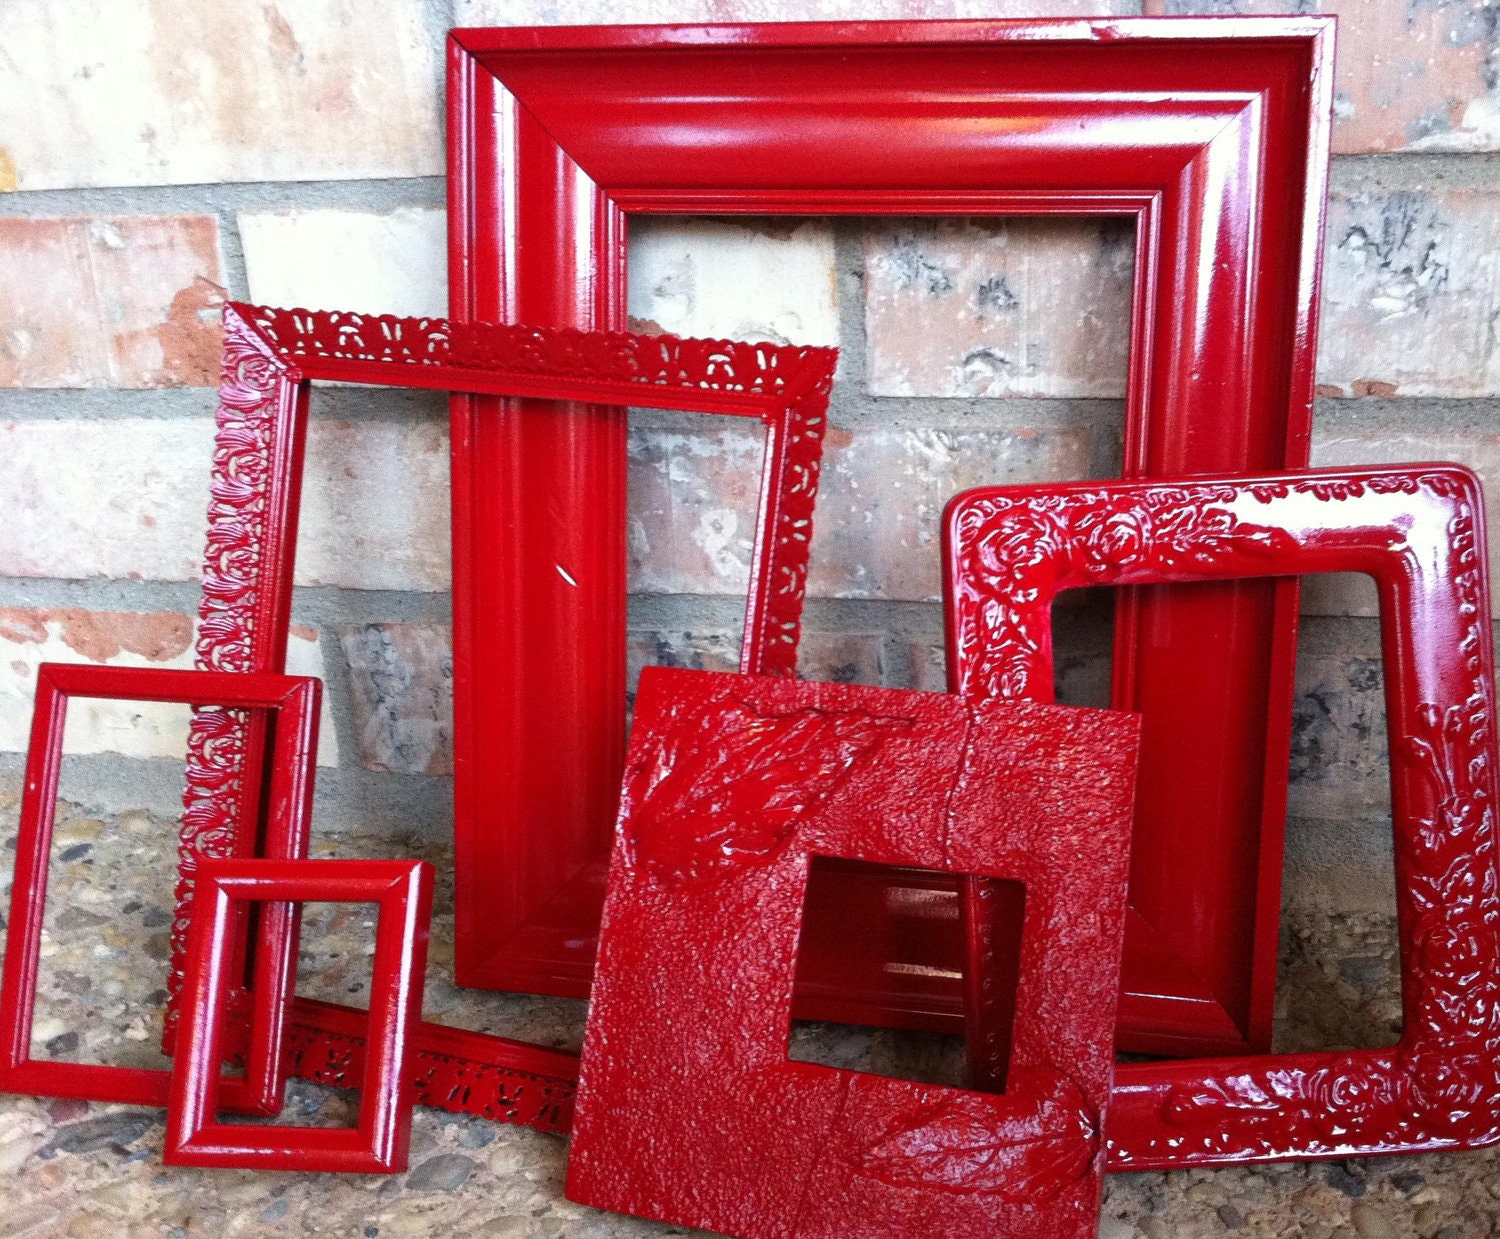 Upcycled Frames Vintage Red Frames Unique Home Decor by FeFiFoFun